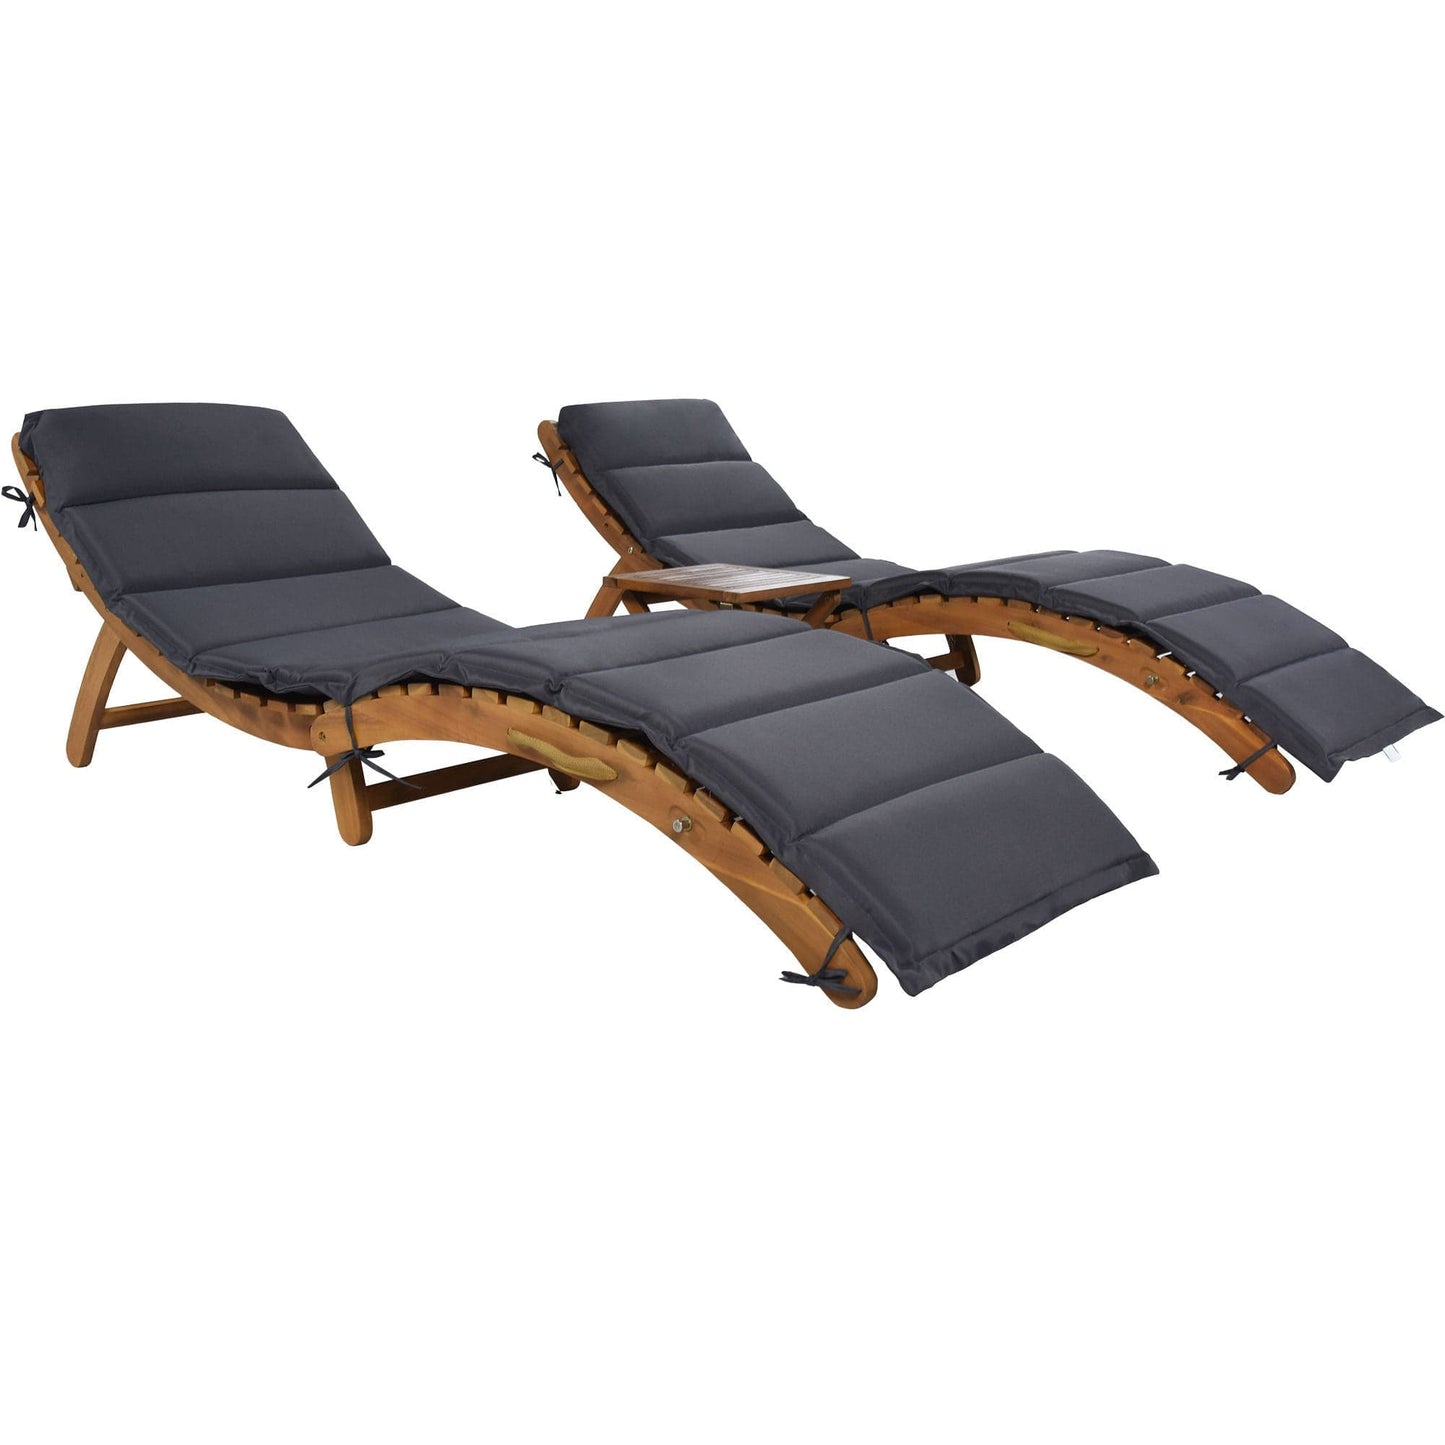 TOPMAX  Outdoor Patio Wood Dark Gray Portable Extended Chaise Lounge Set with Foldable Tea Table